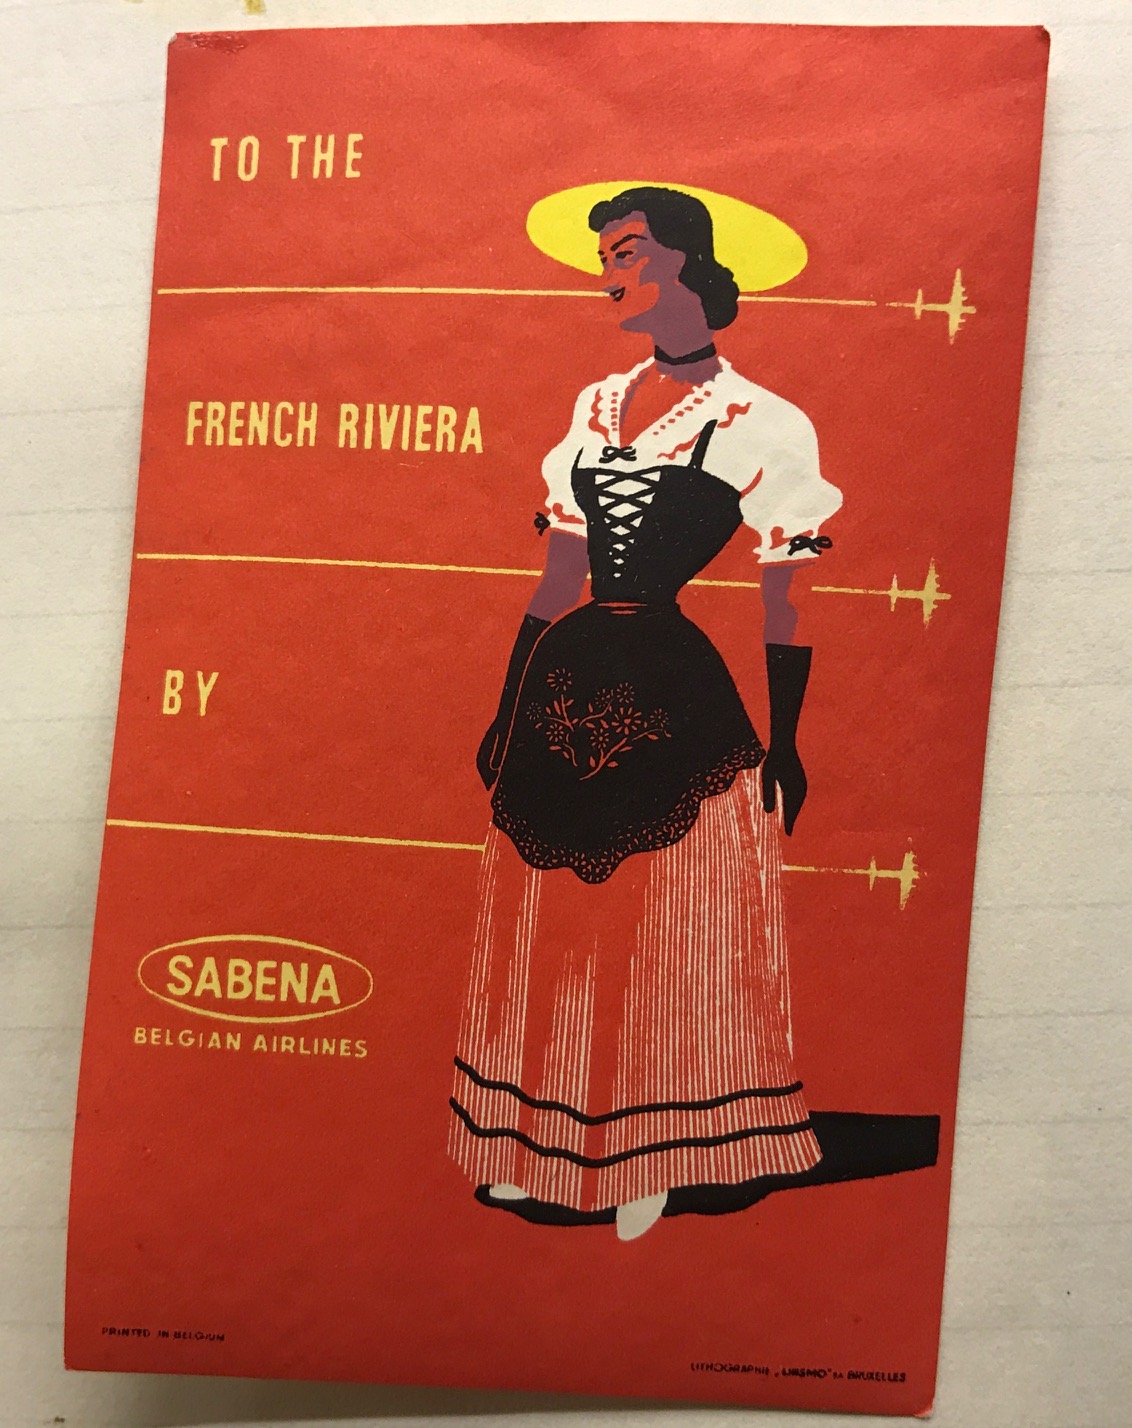 Trevor's Stickies: To the French Riviera by Sabena.